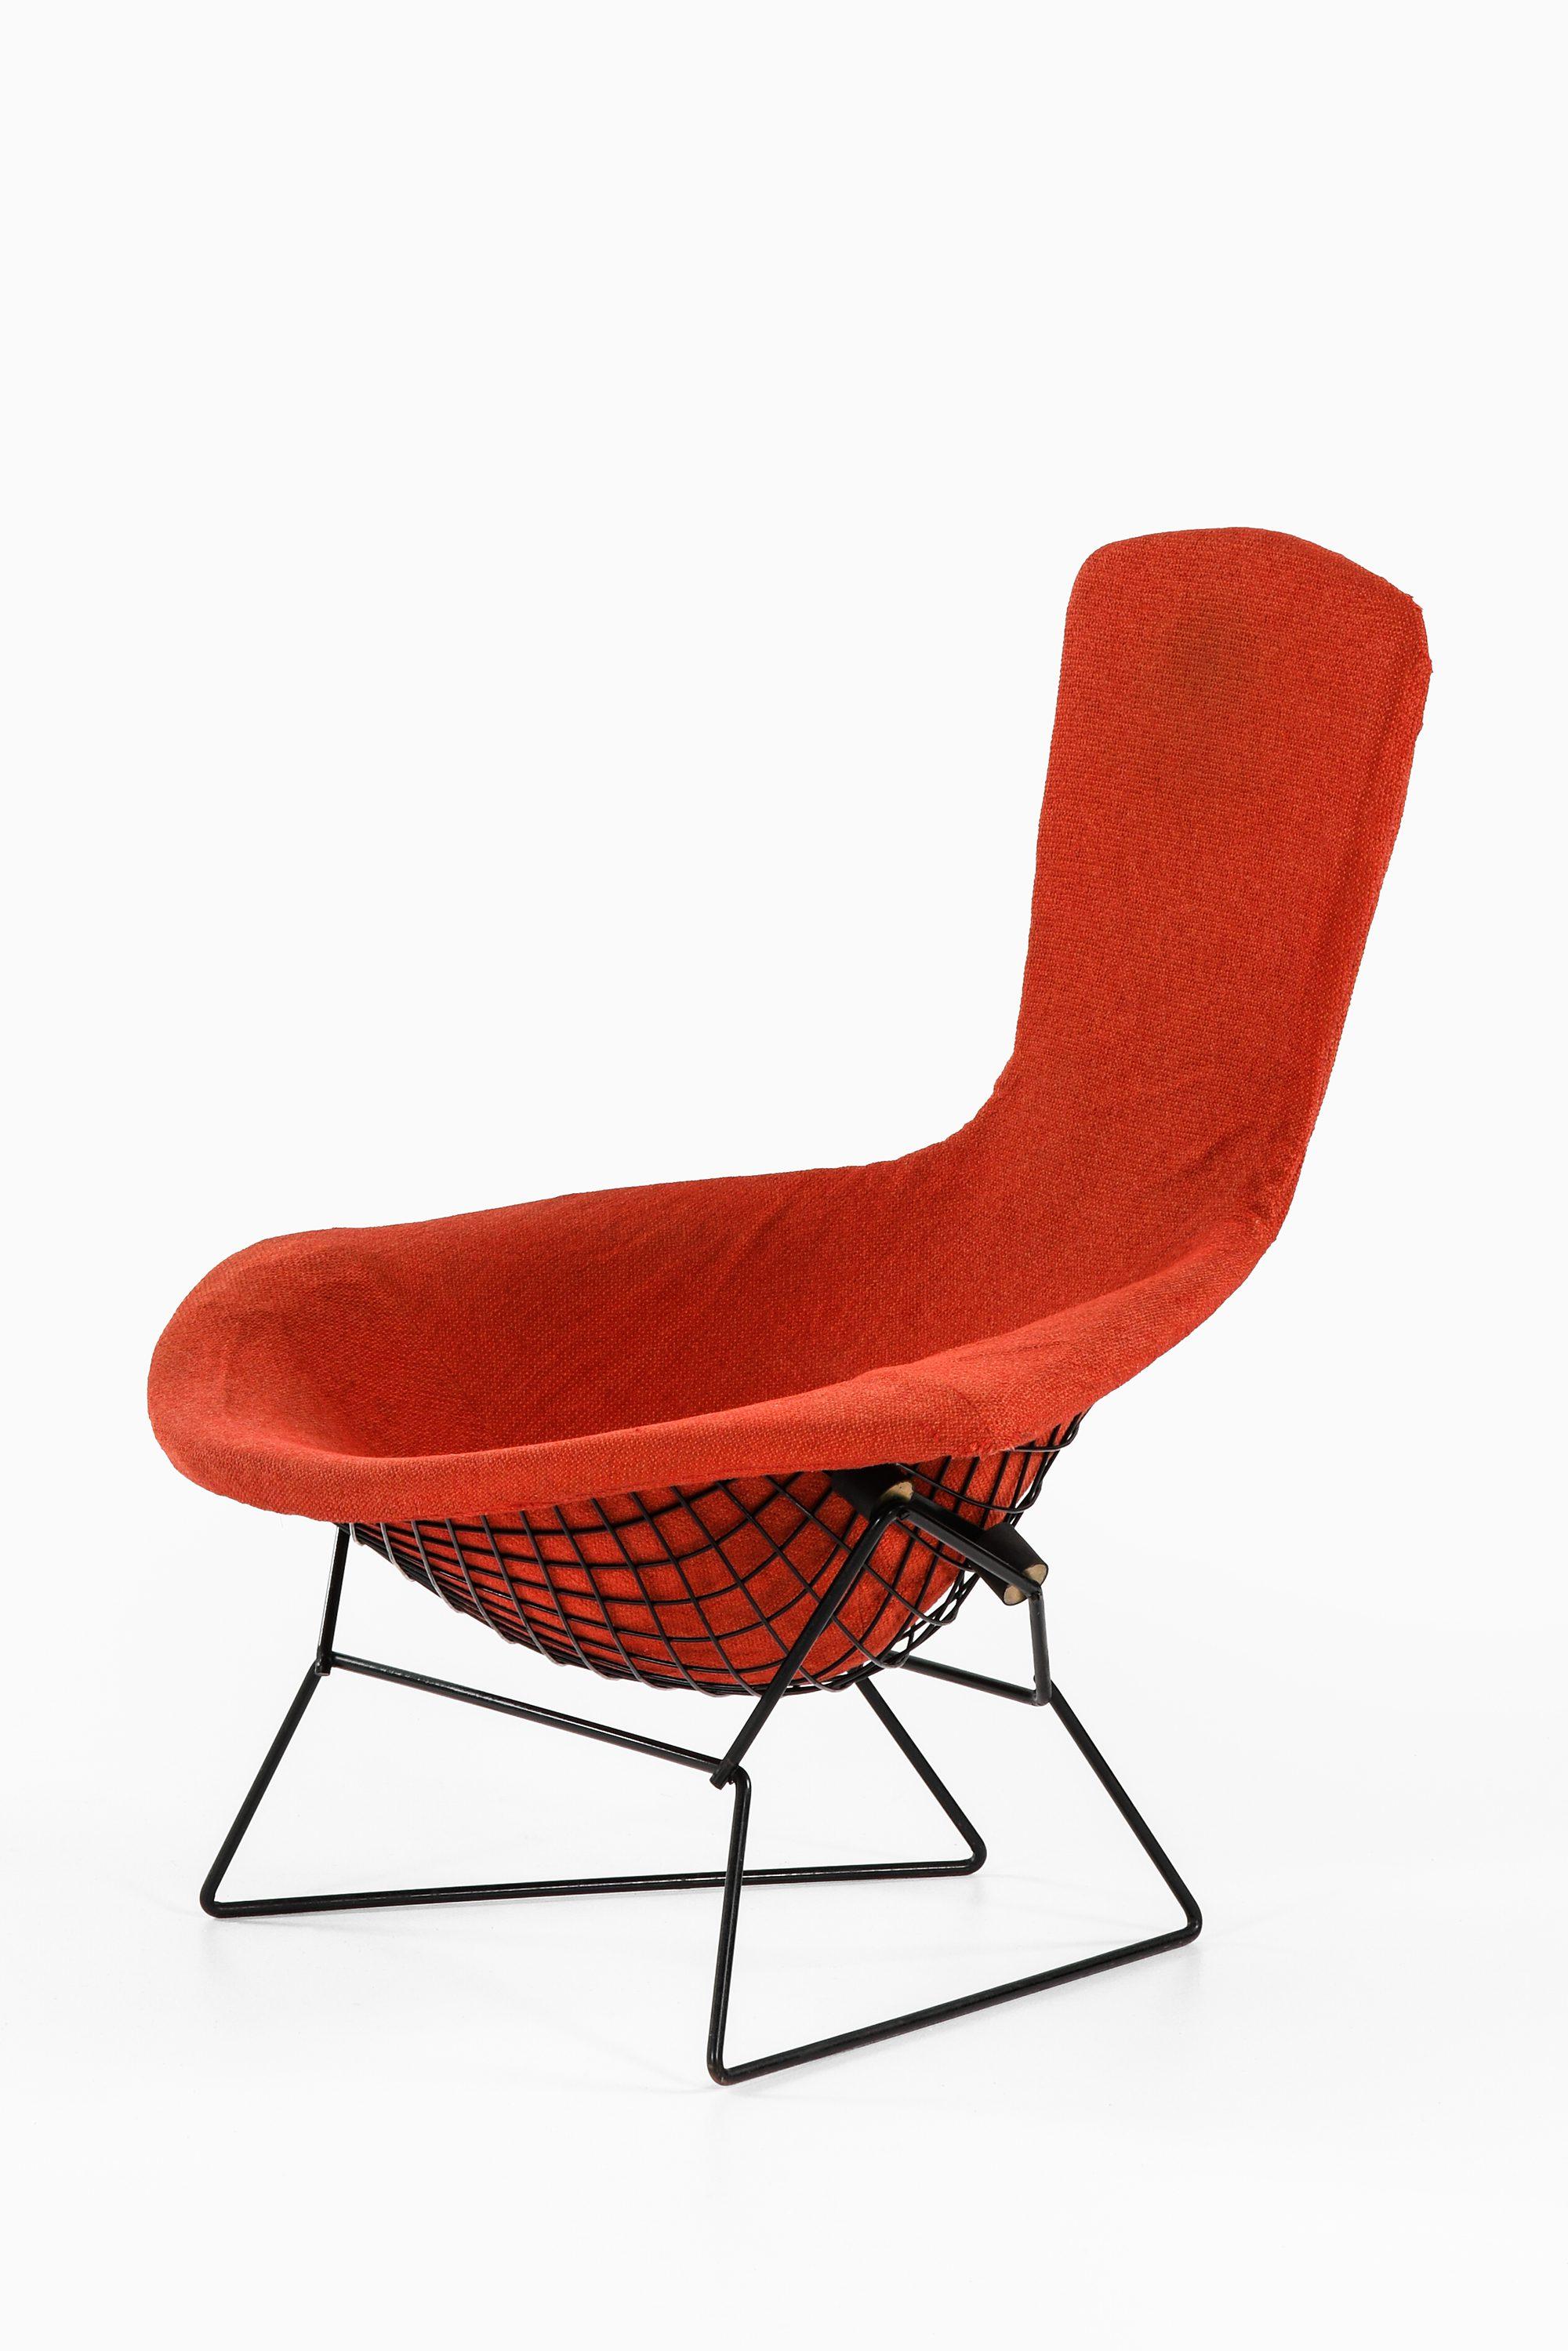 Easy Bird Chair in Black Lacquered Metal and Red Fabric by Harry Bertoia, 1950s

Additional Information:
Material: Black lacquered metal and original red fabric
Style: midcentury, Scandinavian
Produced by Knoll in America
Dimensions (W x D x